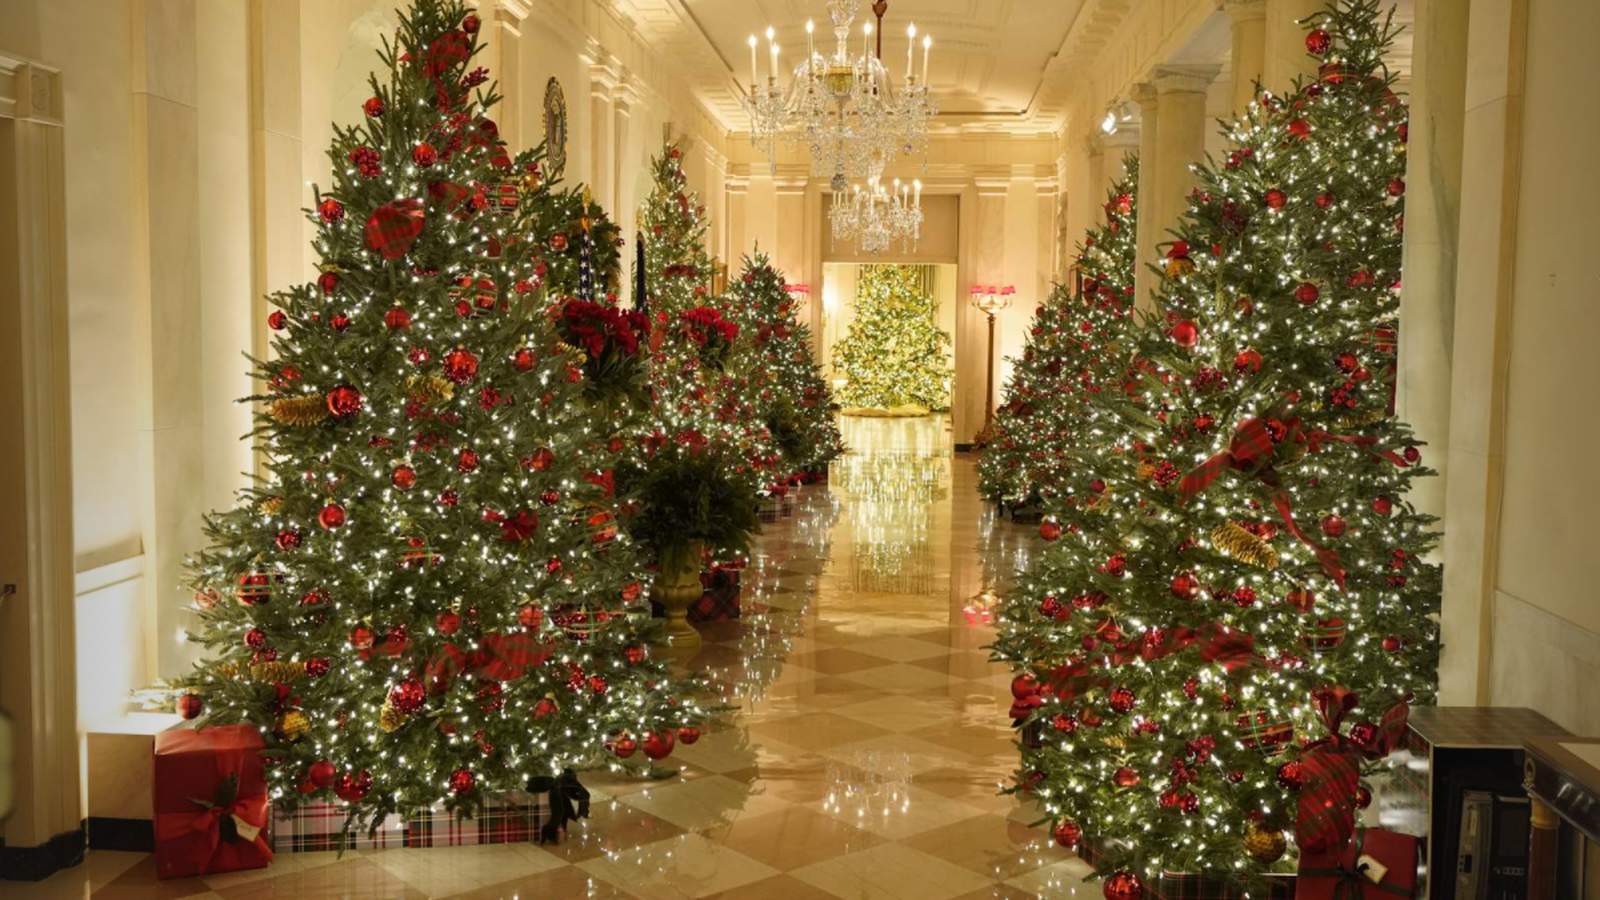 ‘America the Beautiful’ is White House theme for Christmas